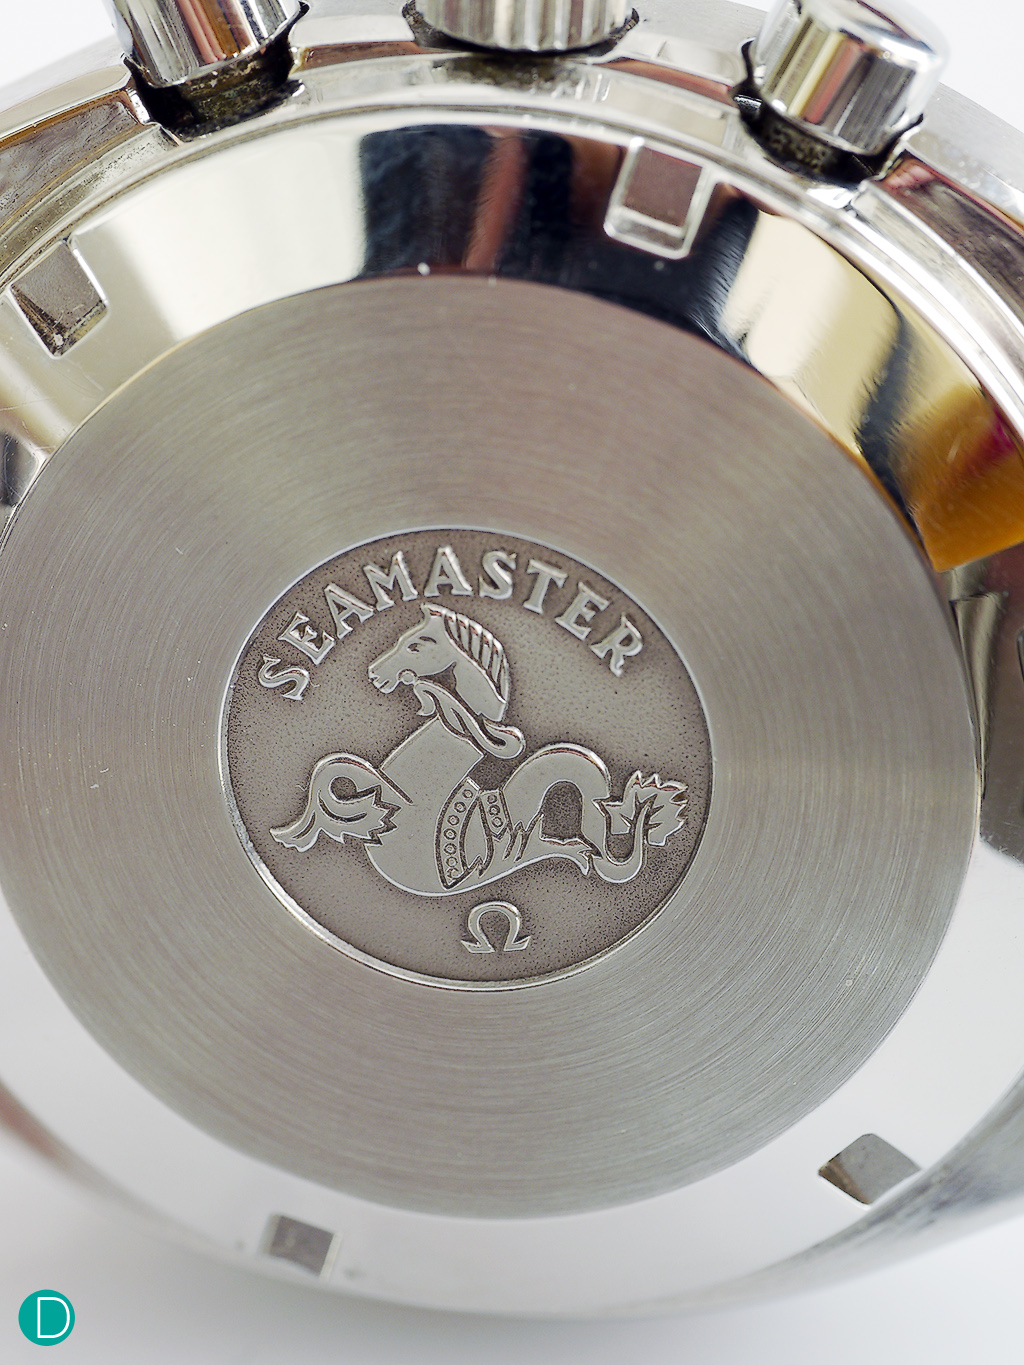 Spotted something different on the caseback?